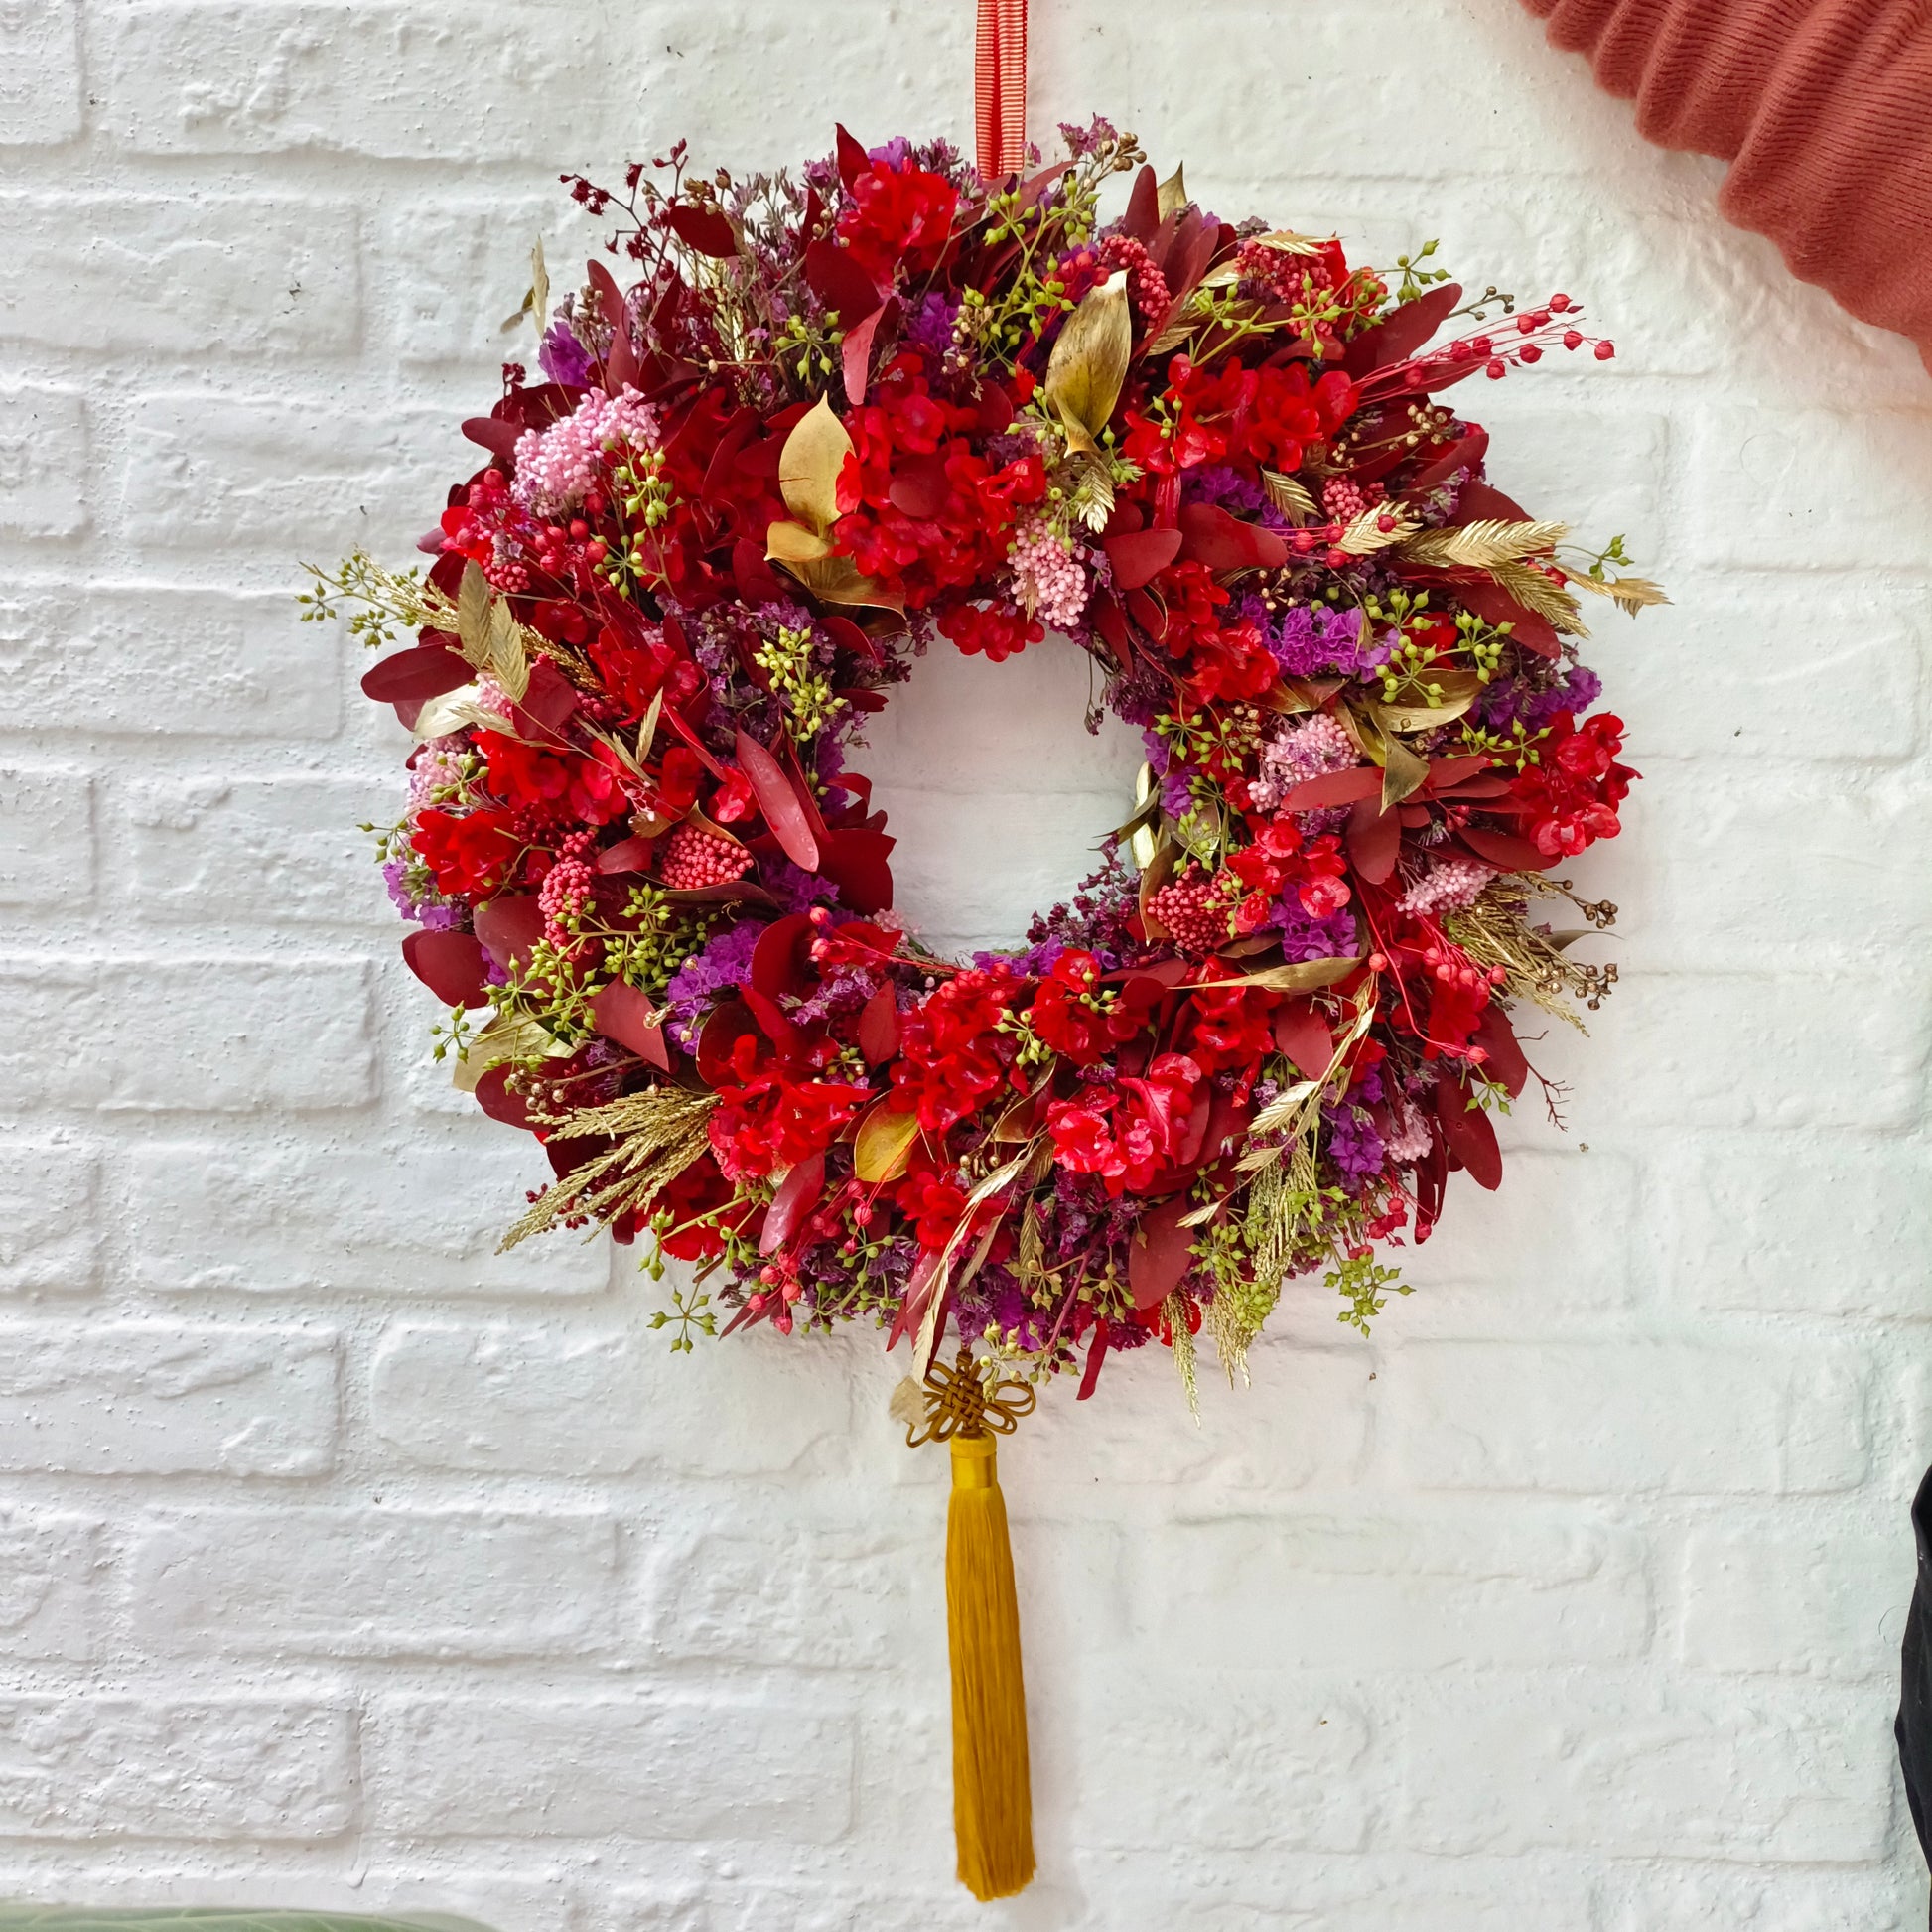 Lunar New Year Wreath, a beautiful combination of red, purple, yellow and gold flower ingredients